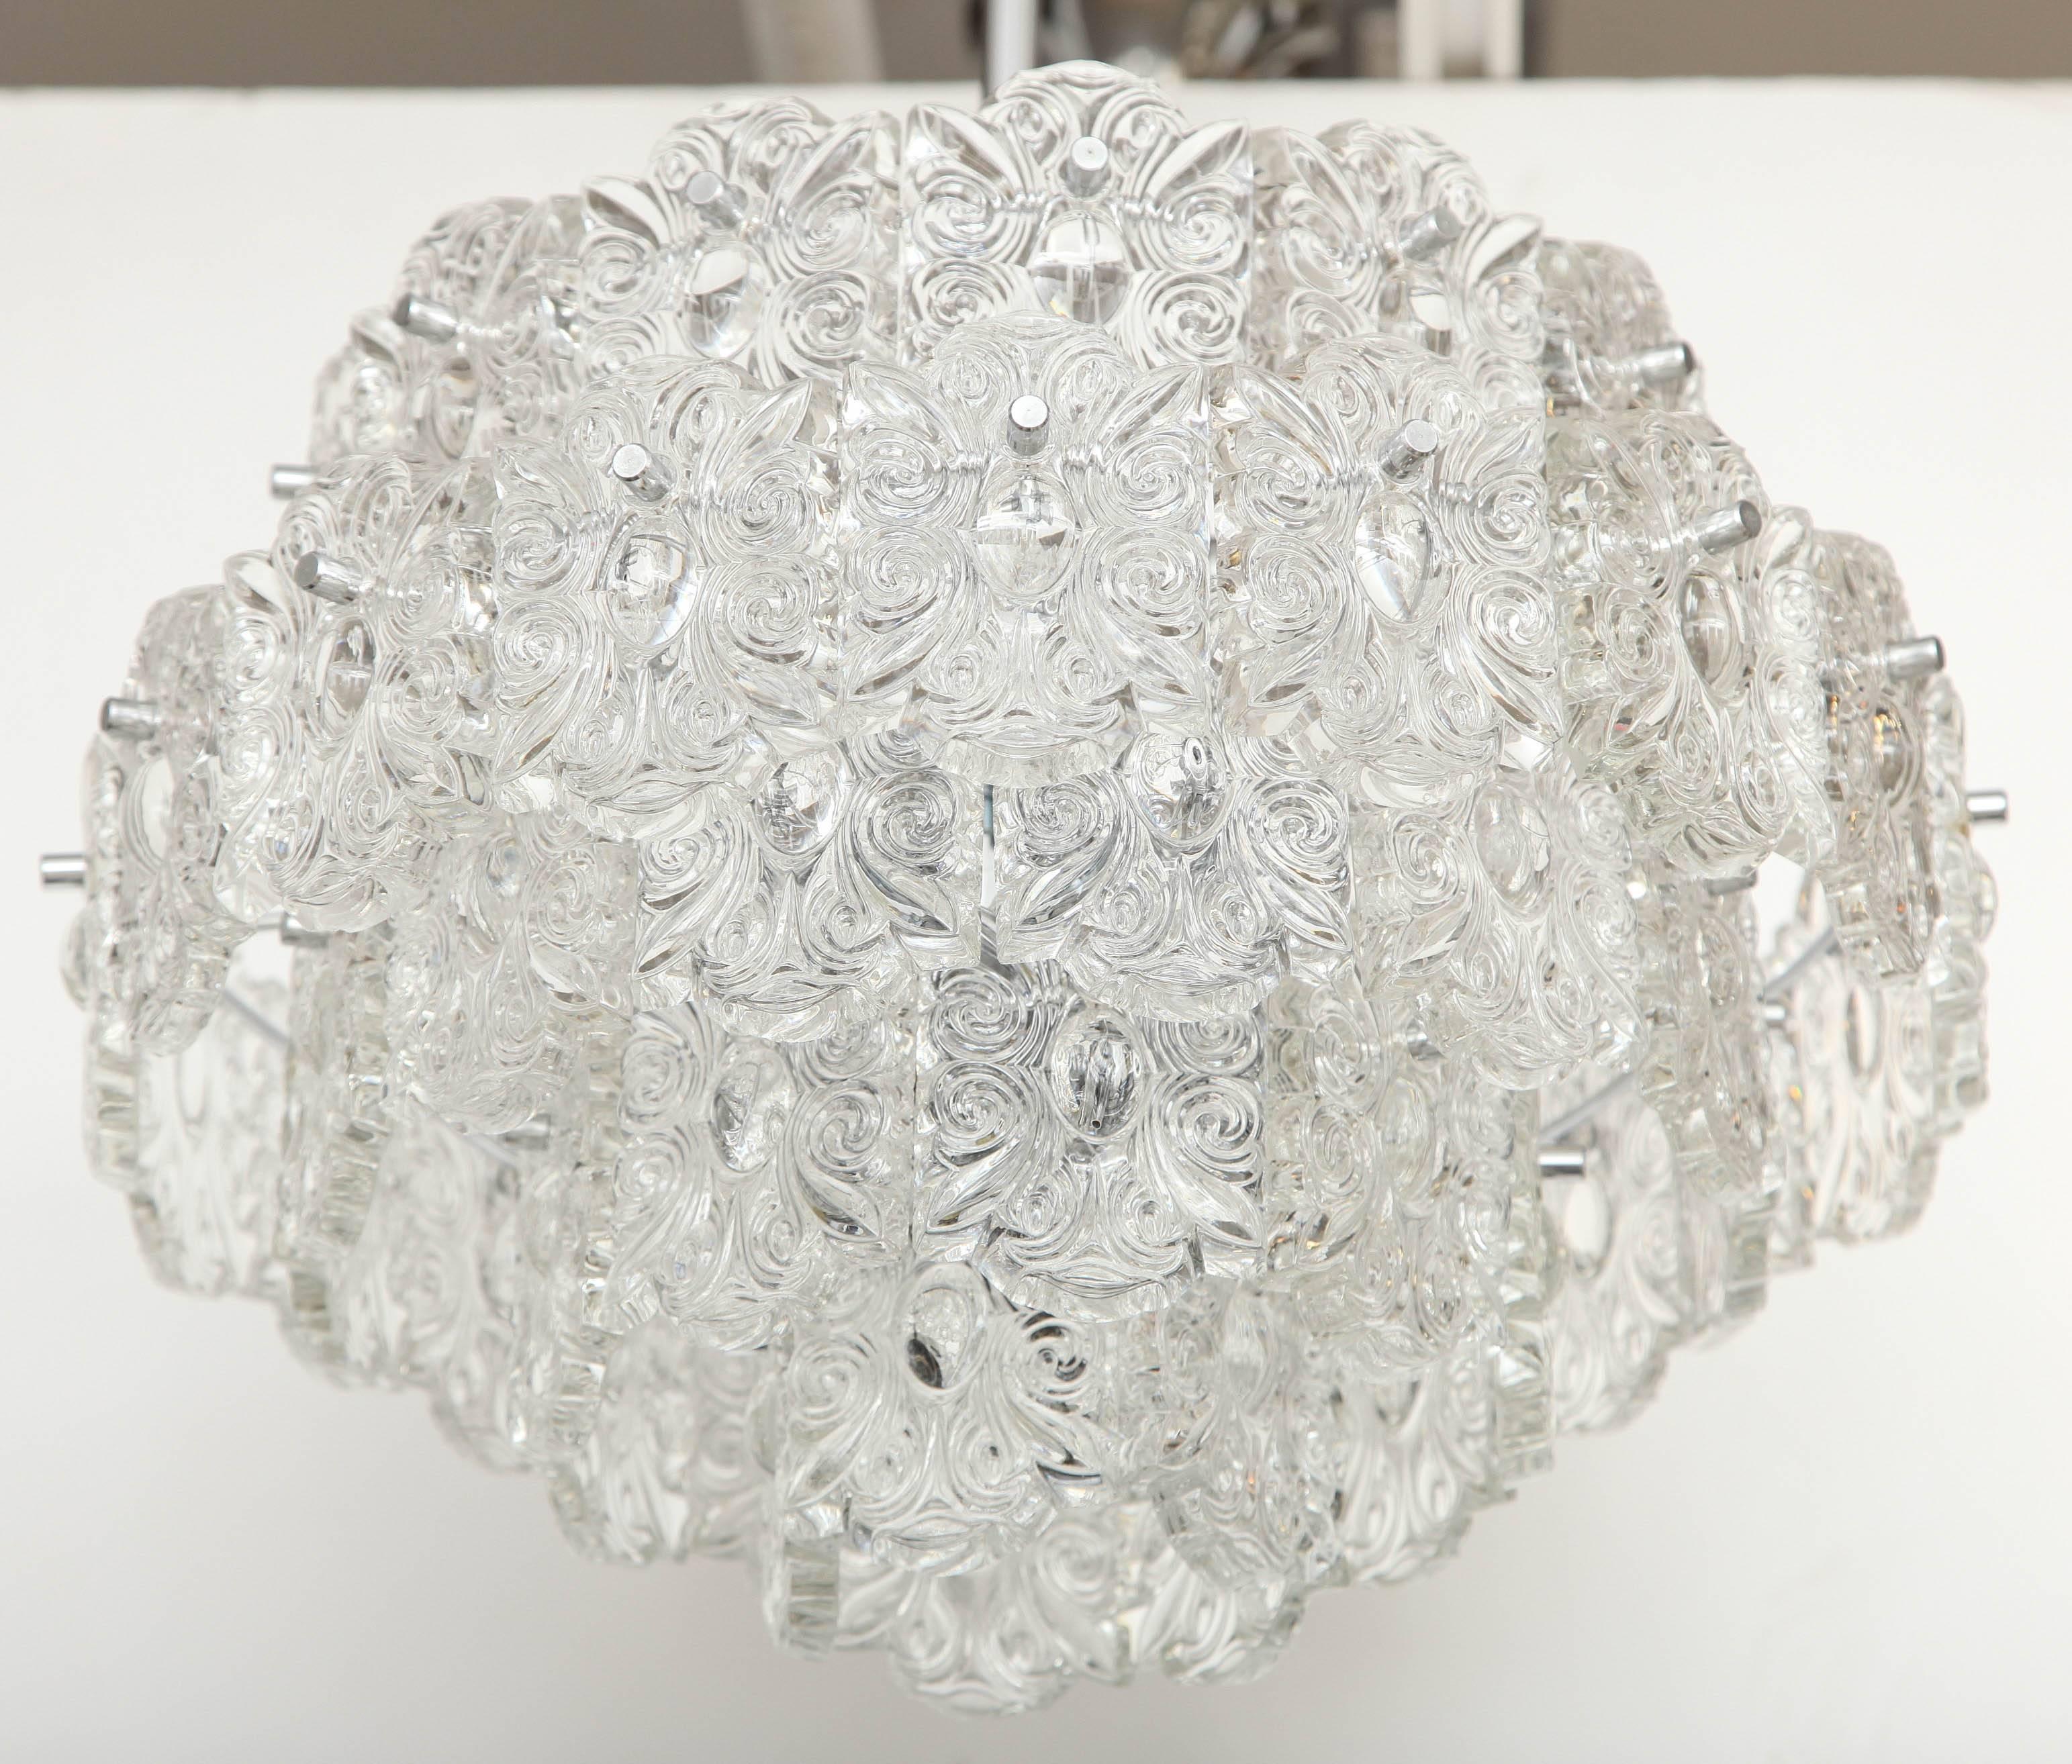 Striking midcentury chandelier composed of five tiers of crystal elements with a scroll design. Chandelier suspended from a nickel canopy and rod. Rewired for use in the USA. 12 sockets using candelabra type bulbs.

Measures: Chandelier body